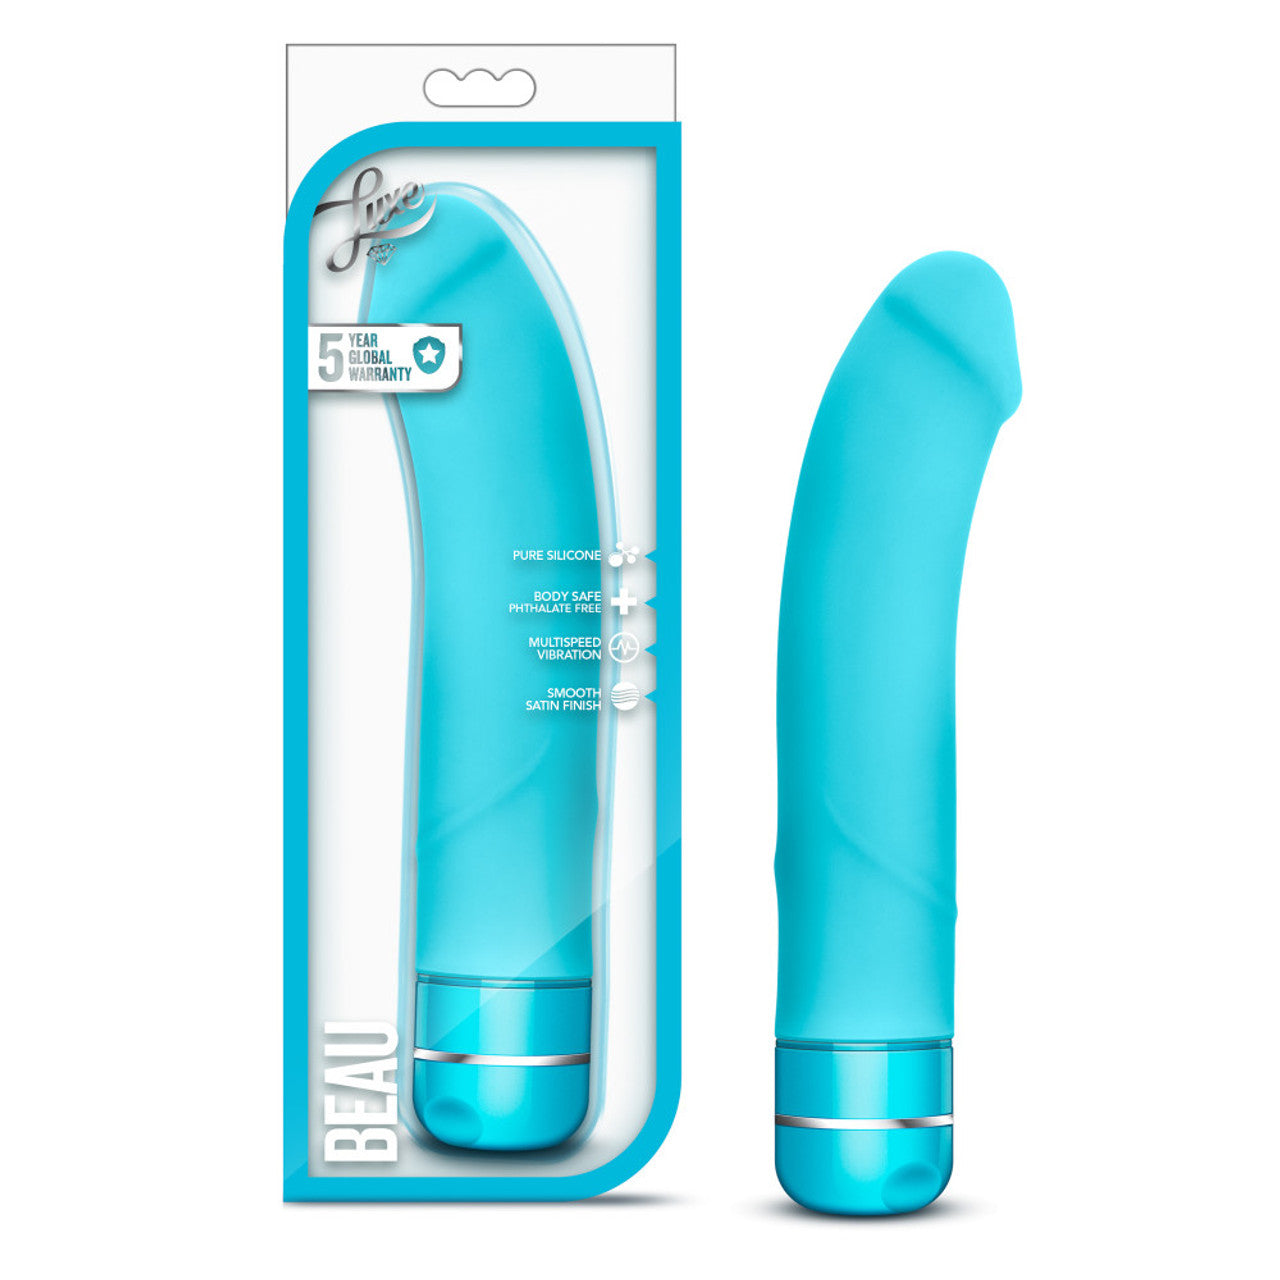 Luxe Beau Silicone G-Spot Vibrator - Blue - Thorn & Feather Sex Toy Canada